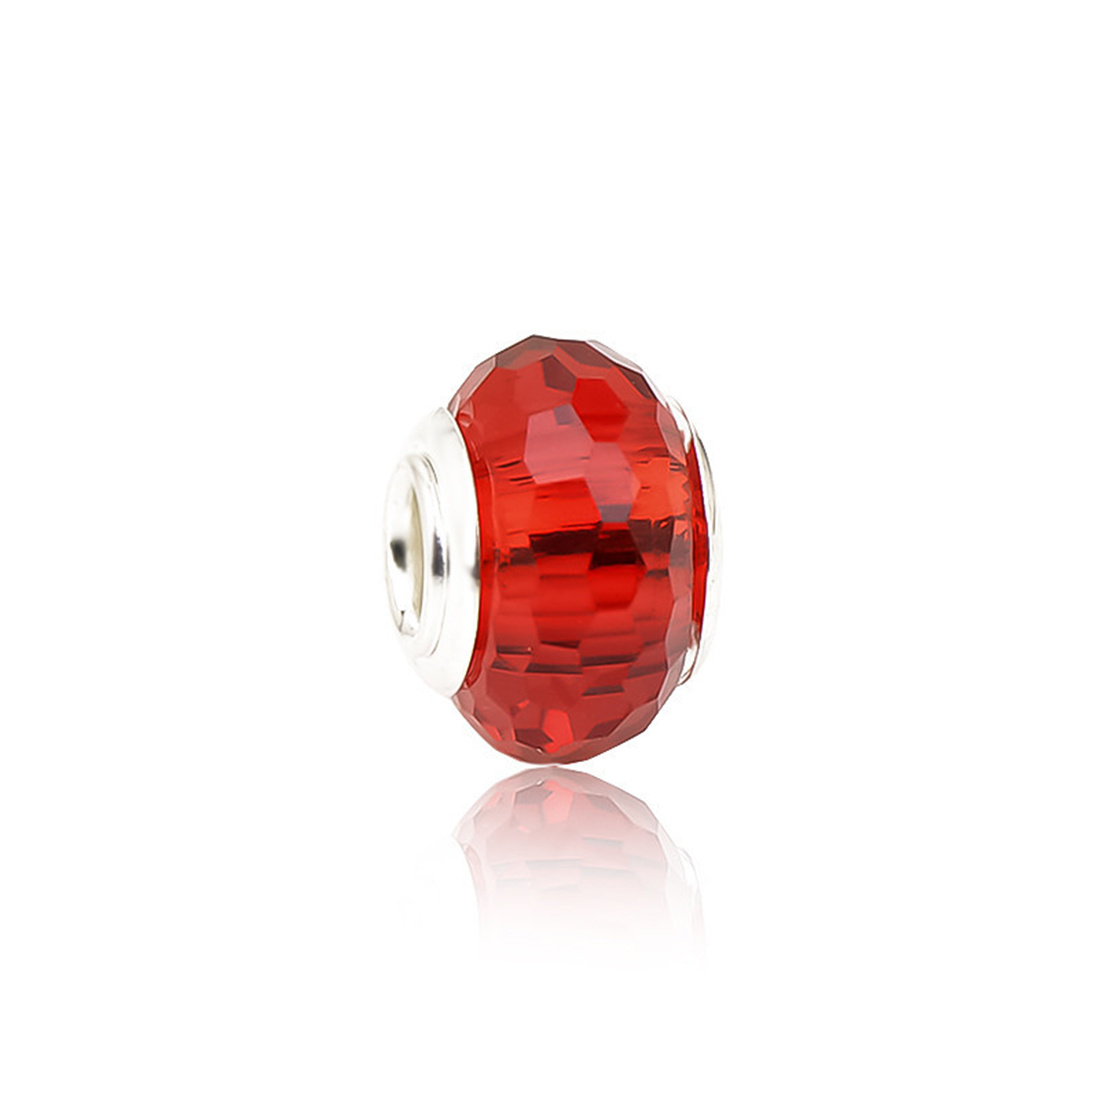 crystal red